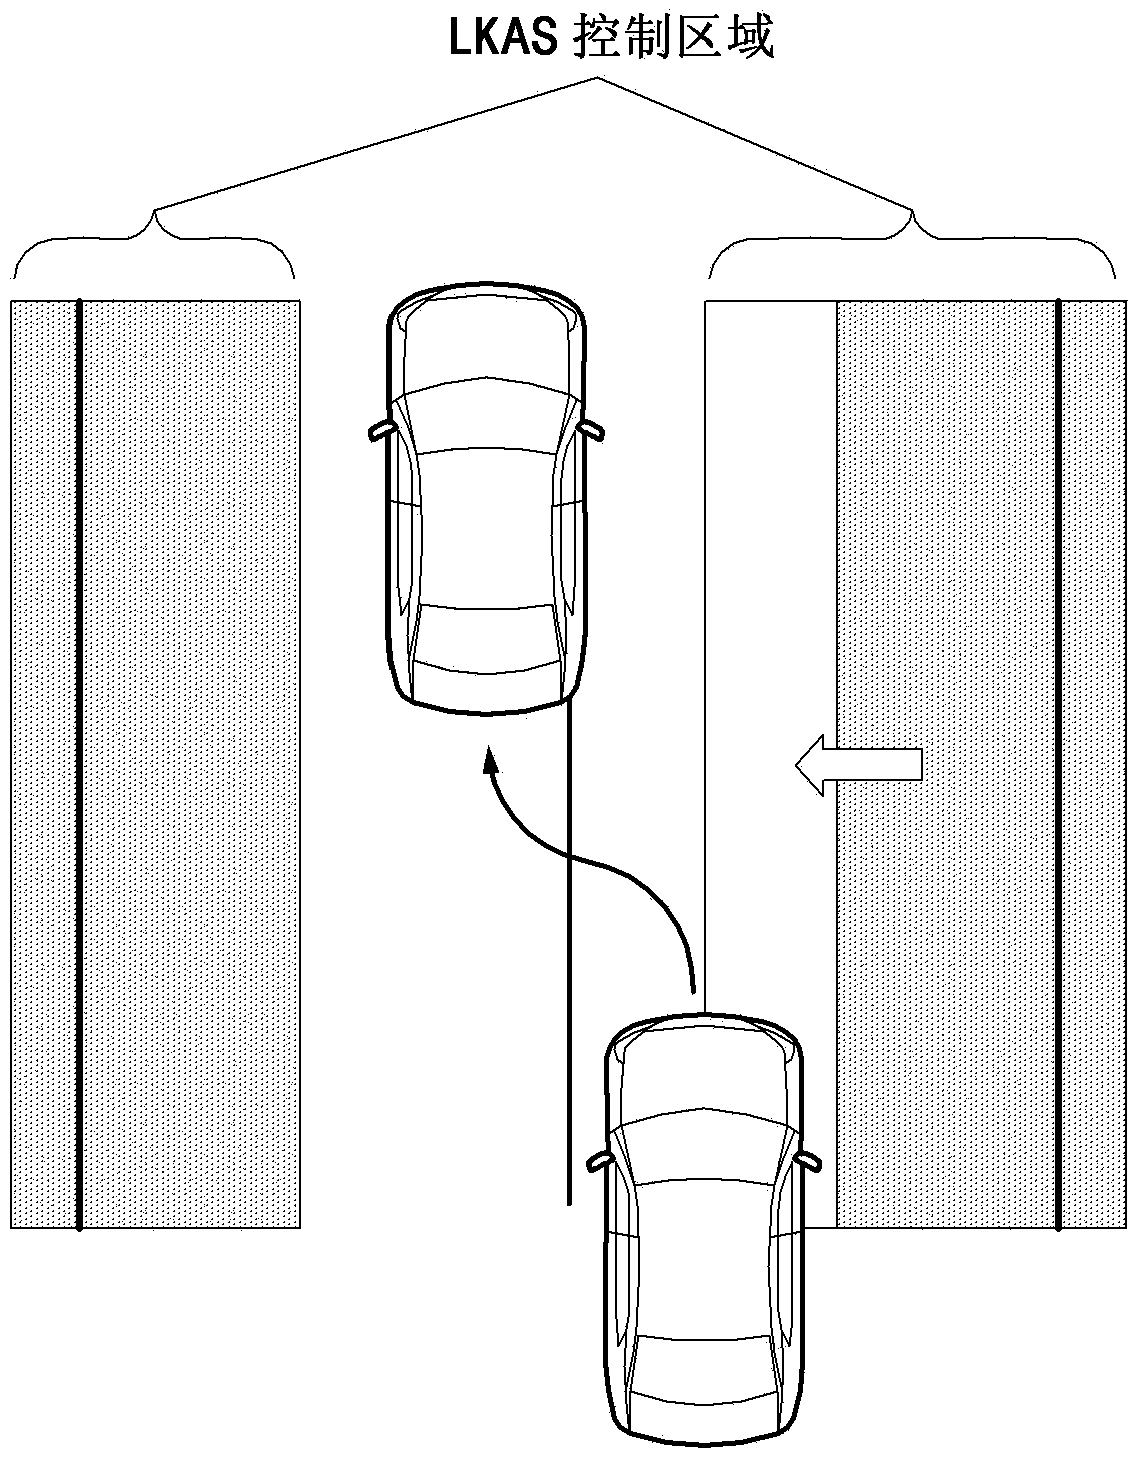 Apparatus and method for providing a crash prevention control functionality for a vehicle